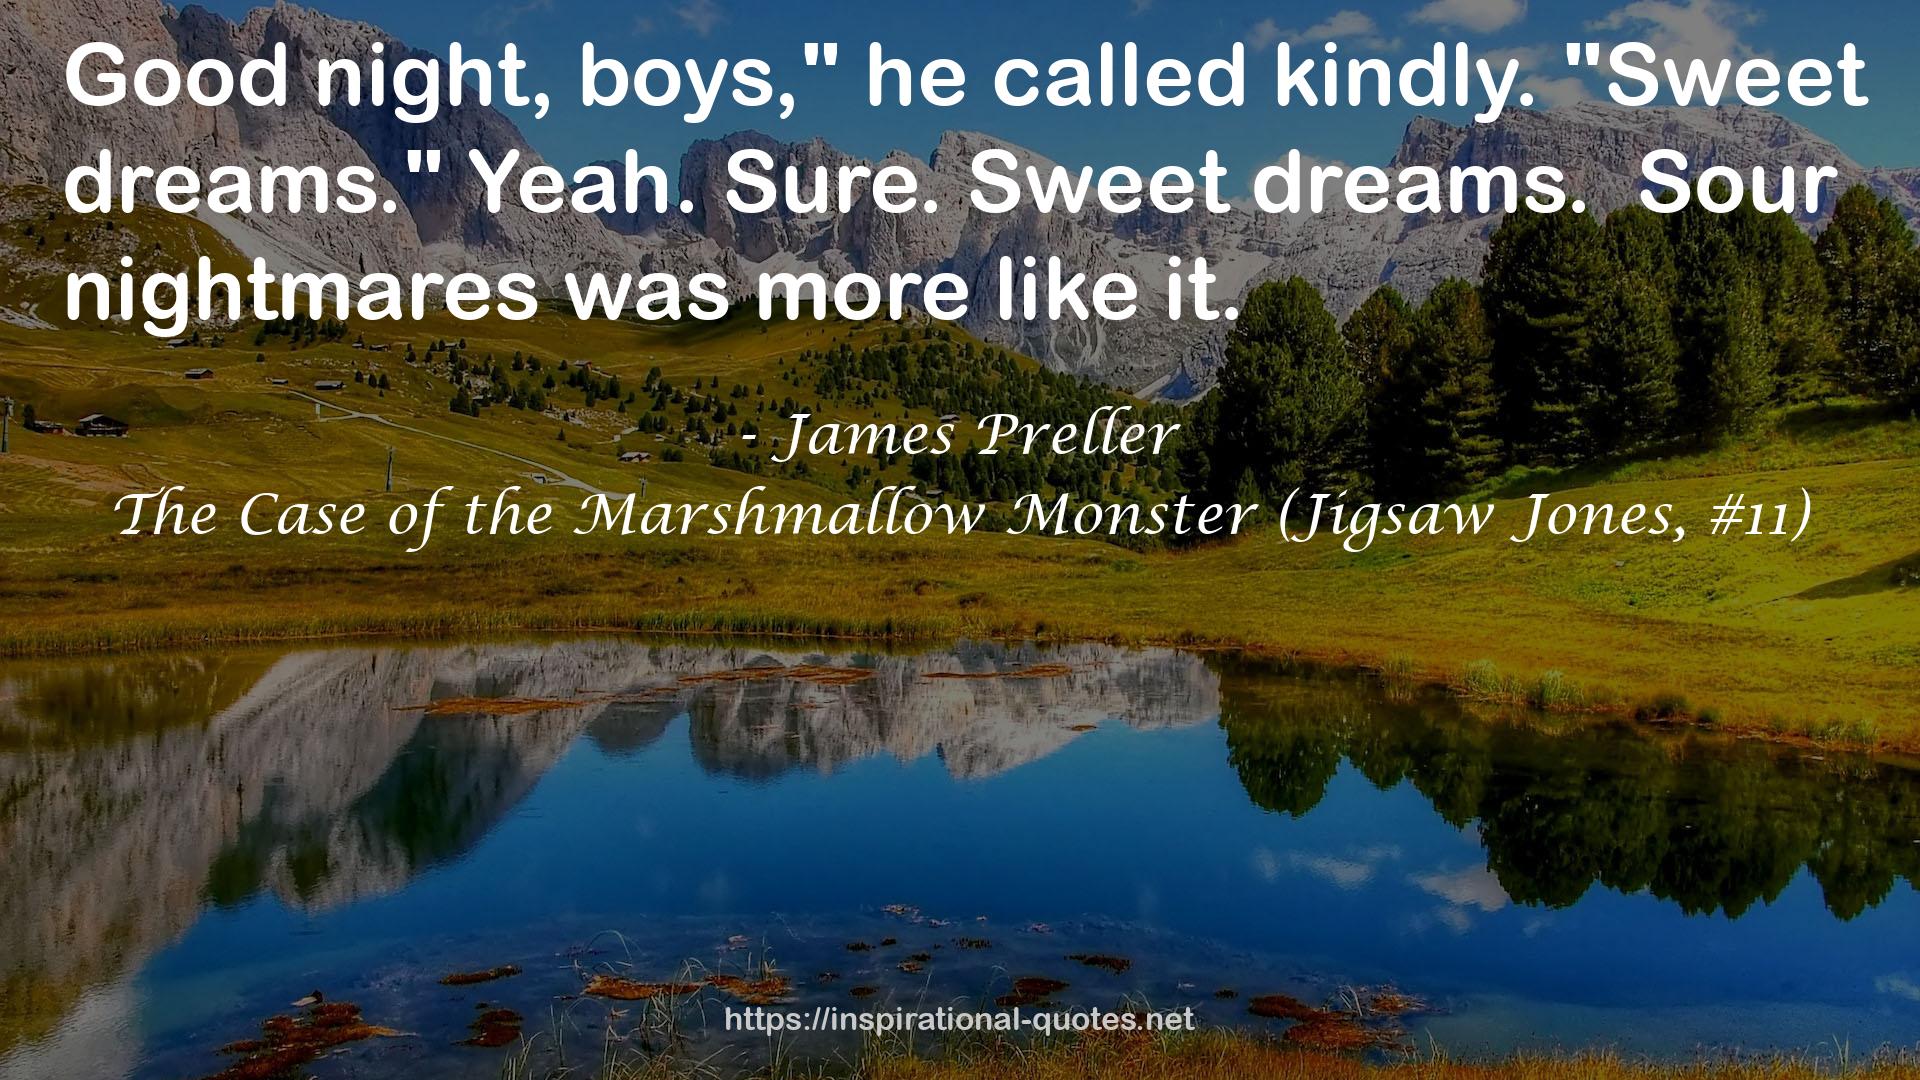 The Case of the Marshmallow Monster (Jigsaw Jones, #11) QUOTES